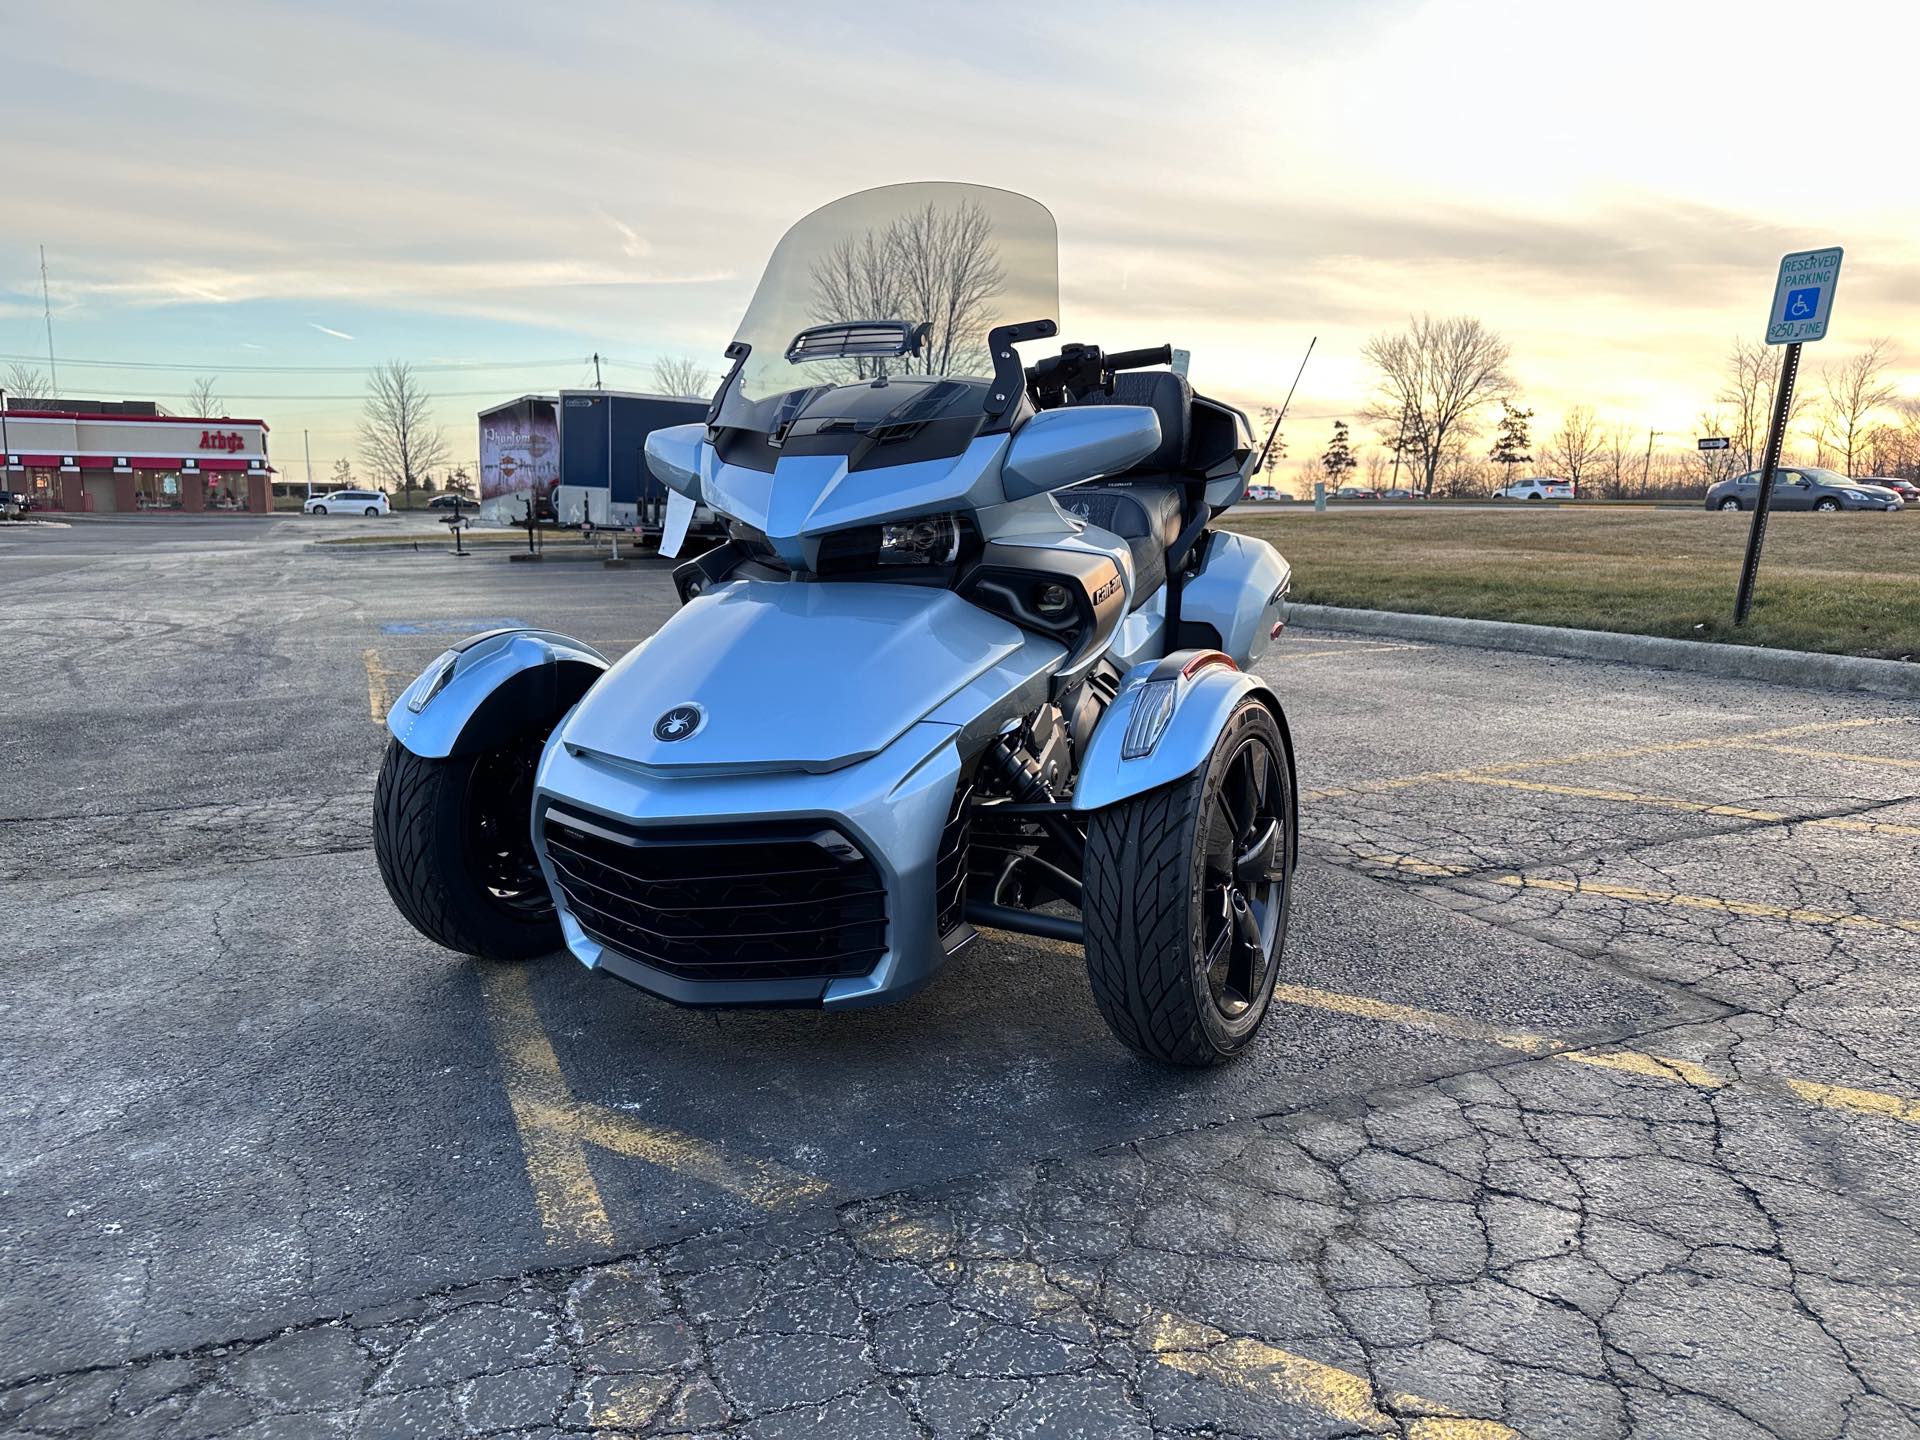 2022 Can-Am Spyder F3 Limited at Chi-Town Harley-Davidson